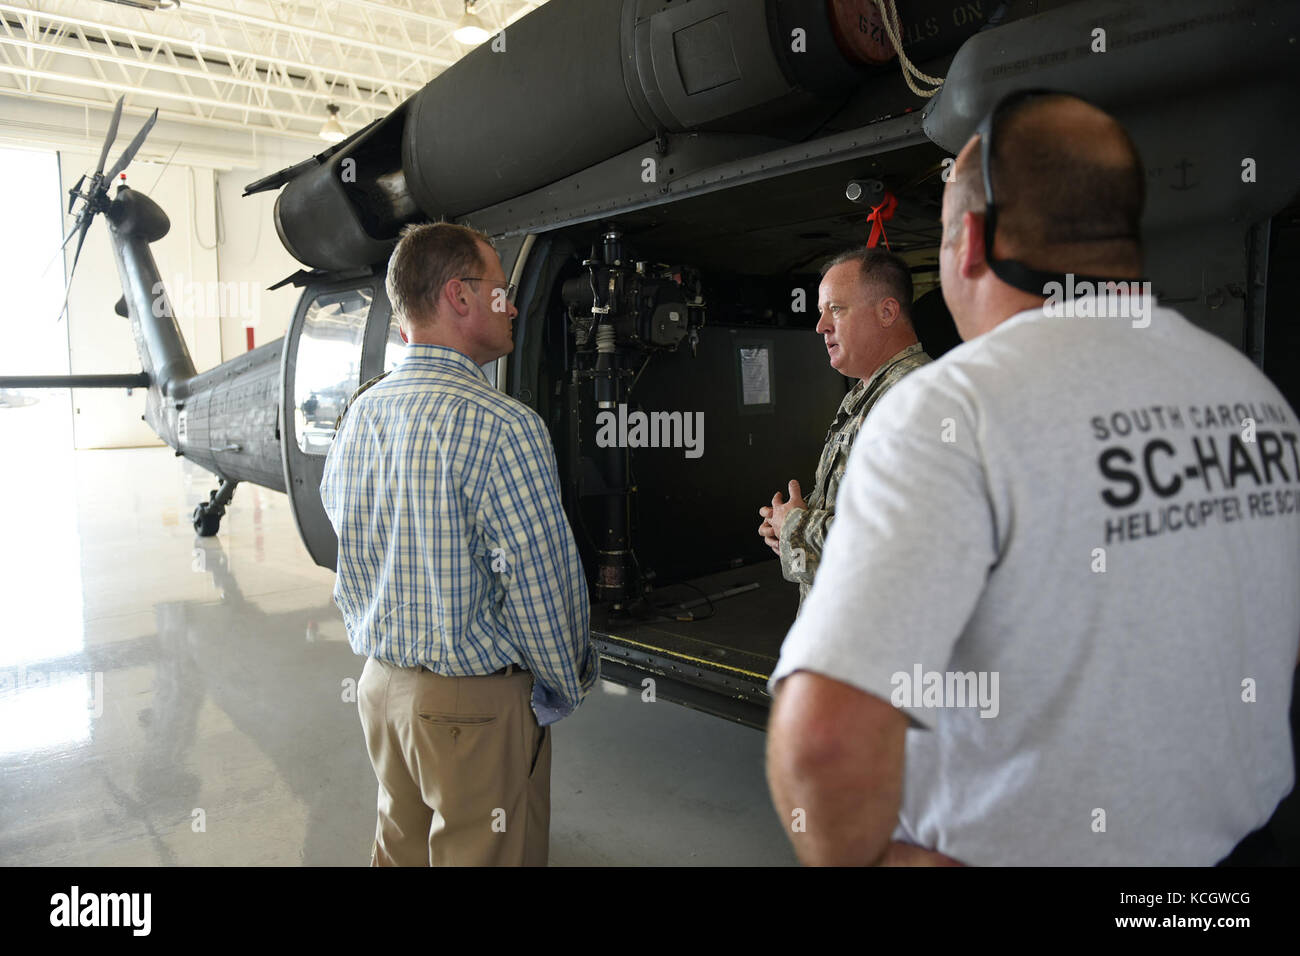 South Carolina Lieutenant Governor Kevin L. Bryant speaks with U.S. Army Chief Warrant Officer 4 Tripp Hutto, a UH-60 Blackhawk pilot, about the S.C. Helicopter Aquatic Rescue Team mission at McEntire Joint National Guard Base, July 21, 2017. Lt. Governor Bryant spoke with South Carolina Air and Army National Guard leadership about base missions and received a windshield tour of the installation with orientations of the various aircraft operated by South Carolina National Guard Airmen and Soldiers.  (U.S. Air National Guard photo by Master Sgt. Caycee Watson) Stock Photo